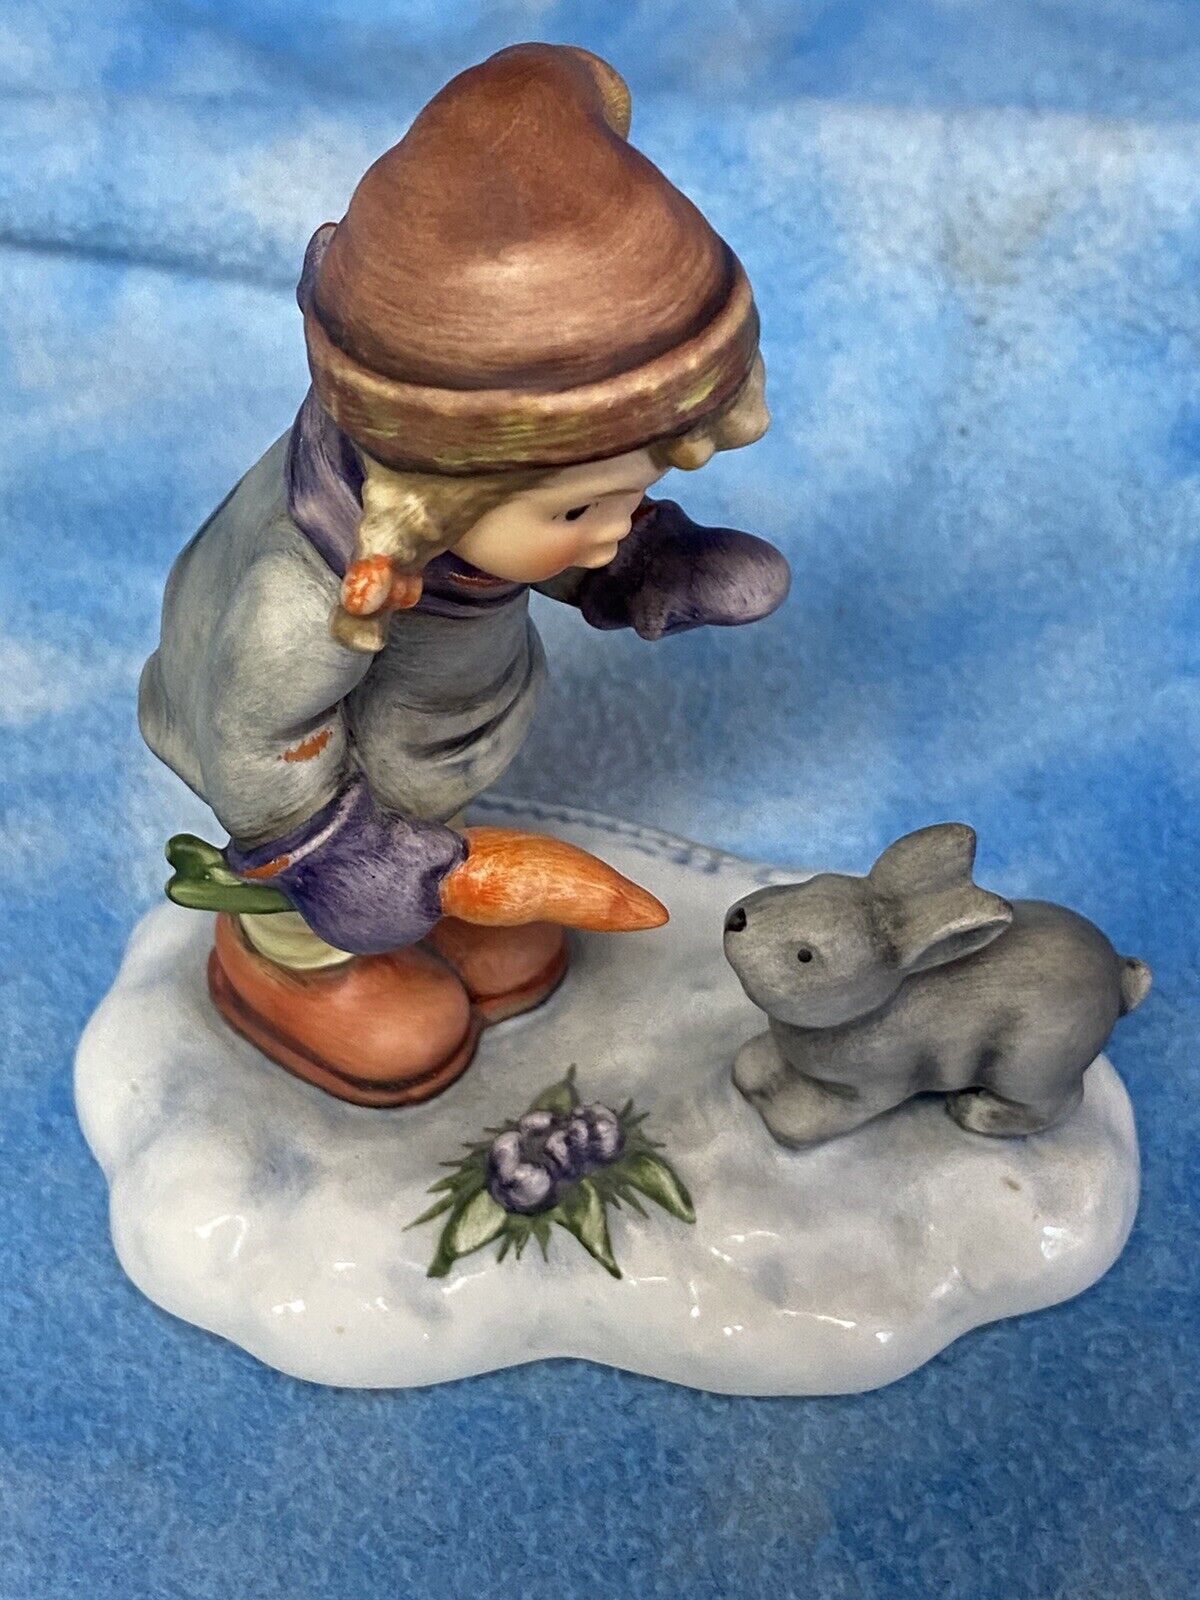 Hummel Figurine Peaceful Offering 1848/25000 made Great Condition